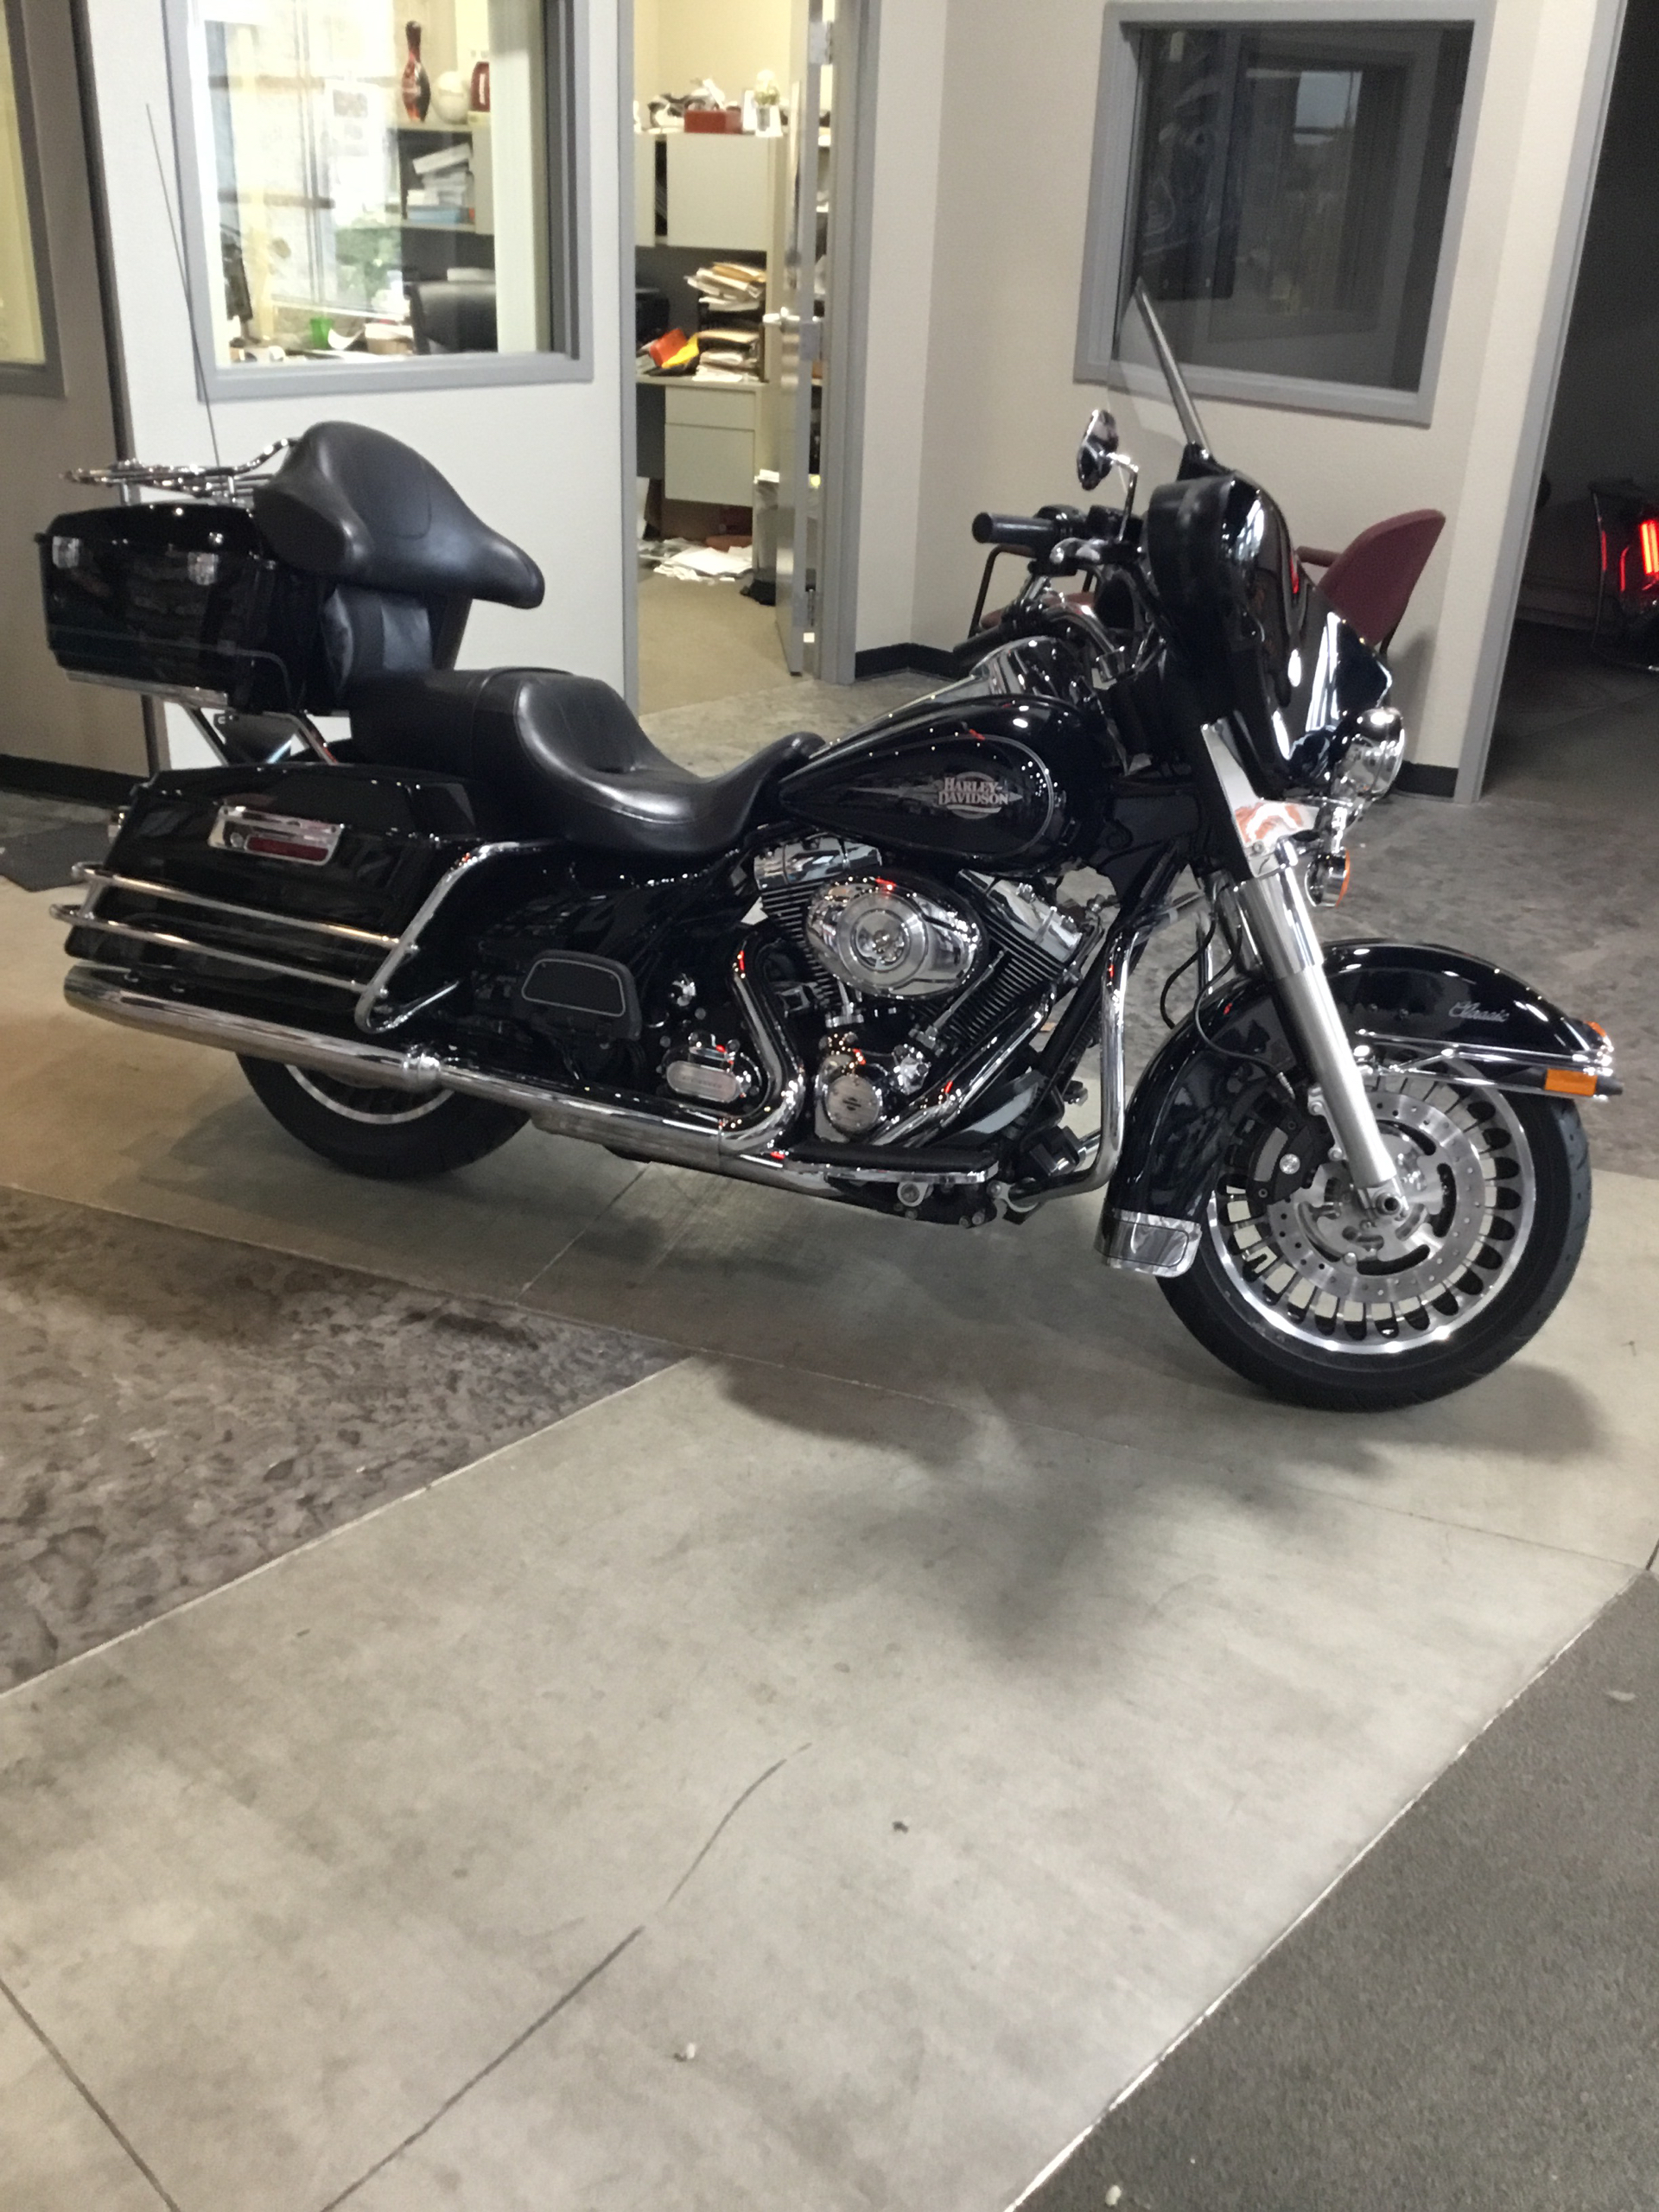 Used 2012 Harley-Davidson Electra Glide® Classic Motorcycles in 